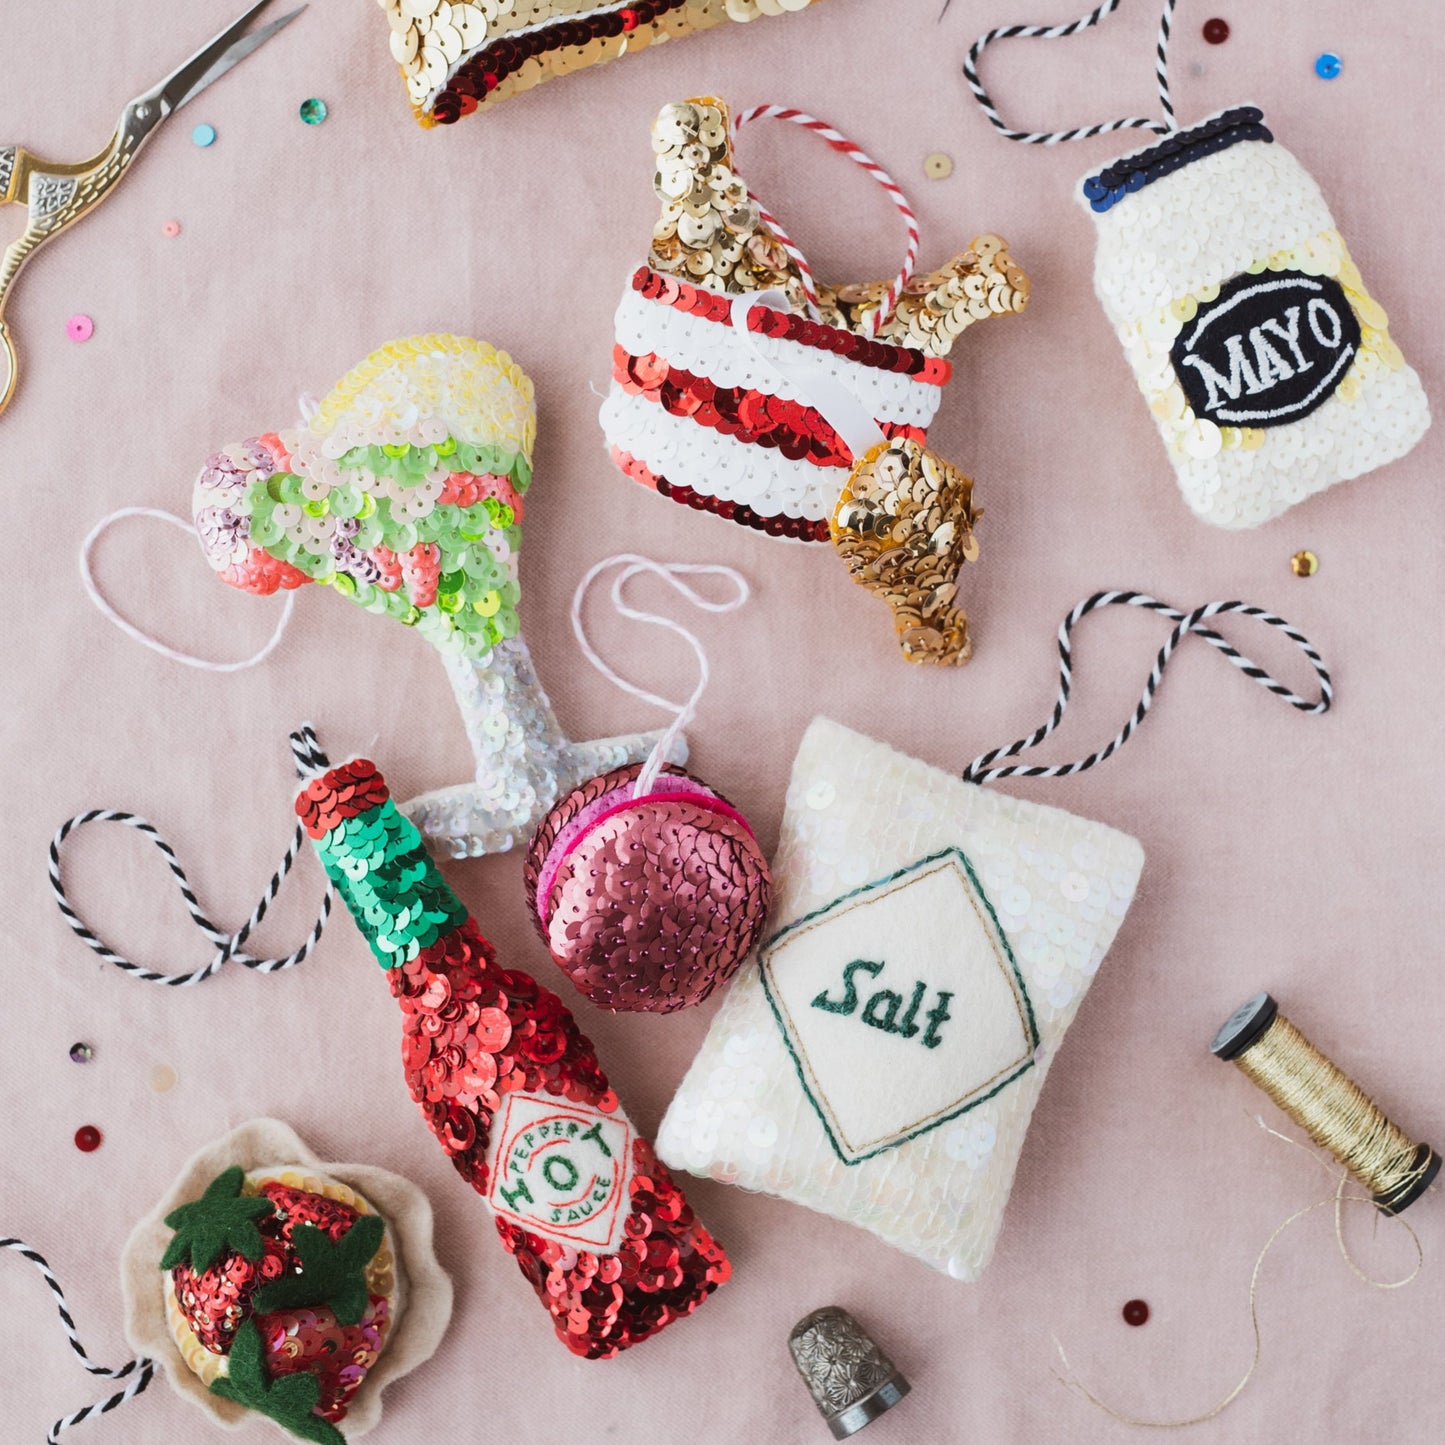 A collection of sequin ornaments on a pink background including a pink macaron, tabasco sauce bottle, fried chicken bucket and mayo jar